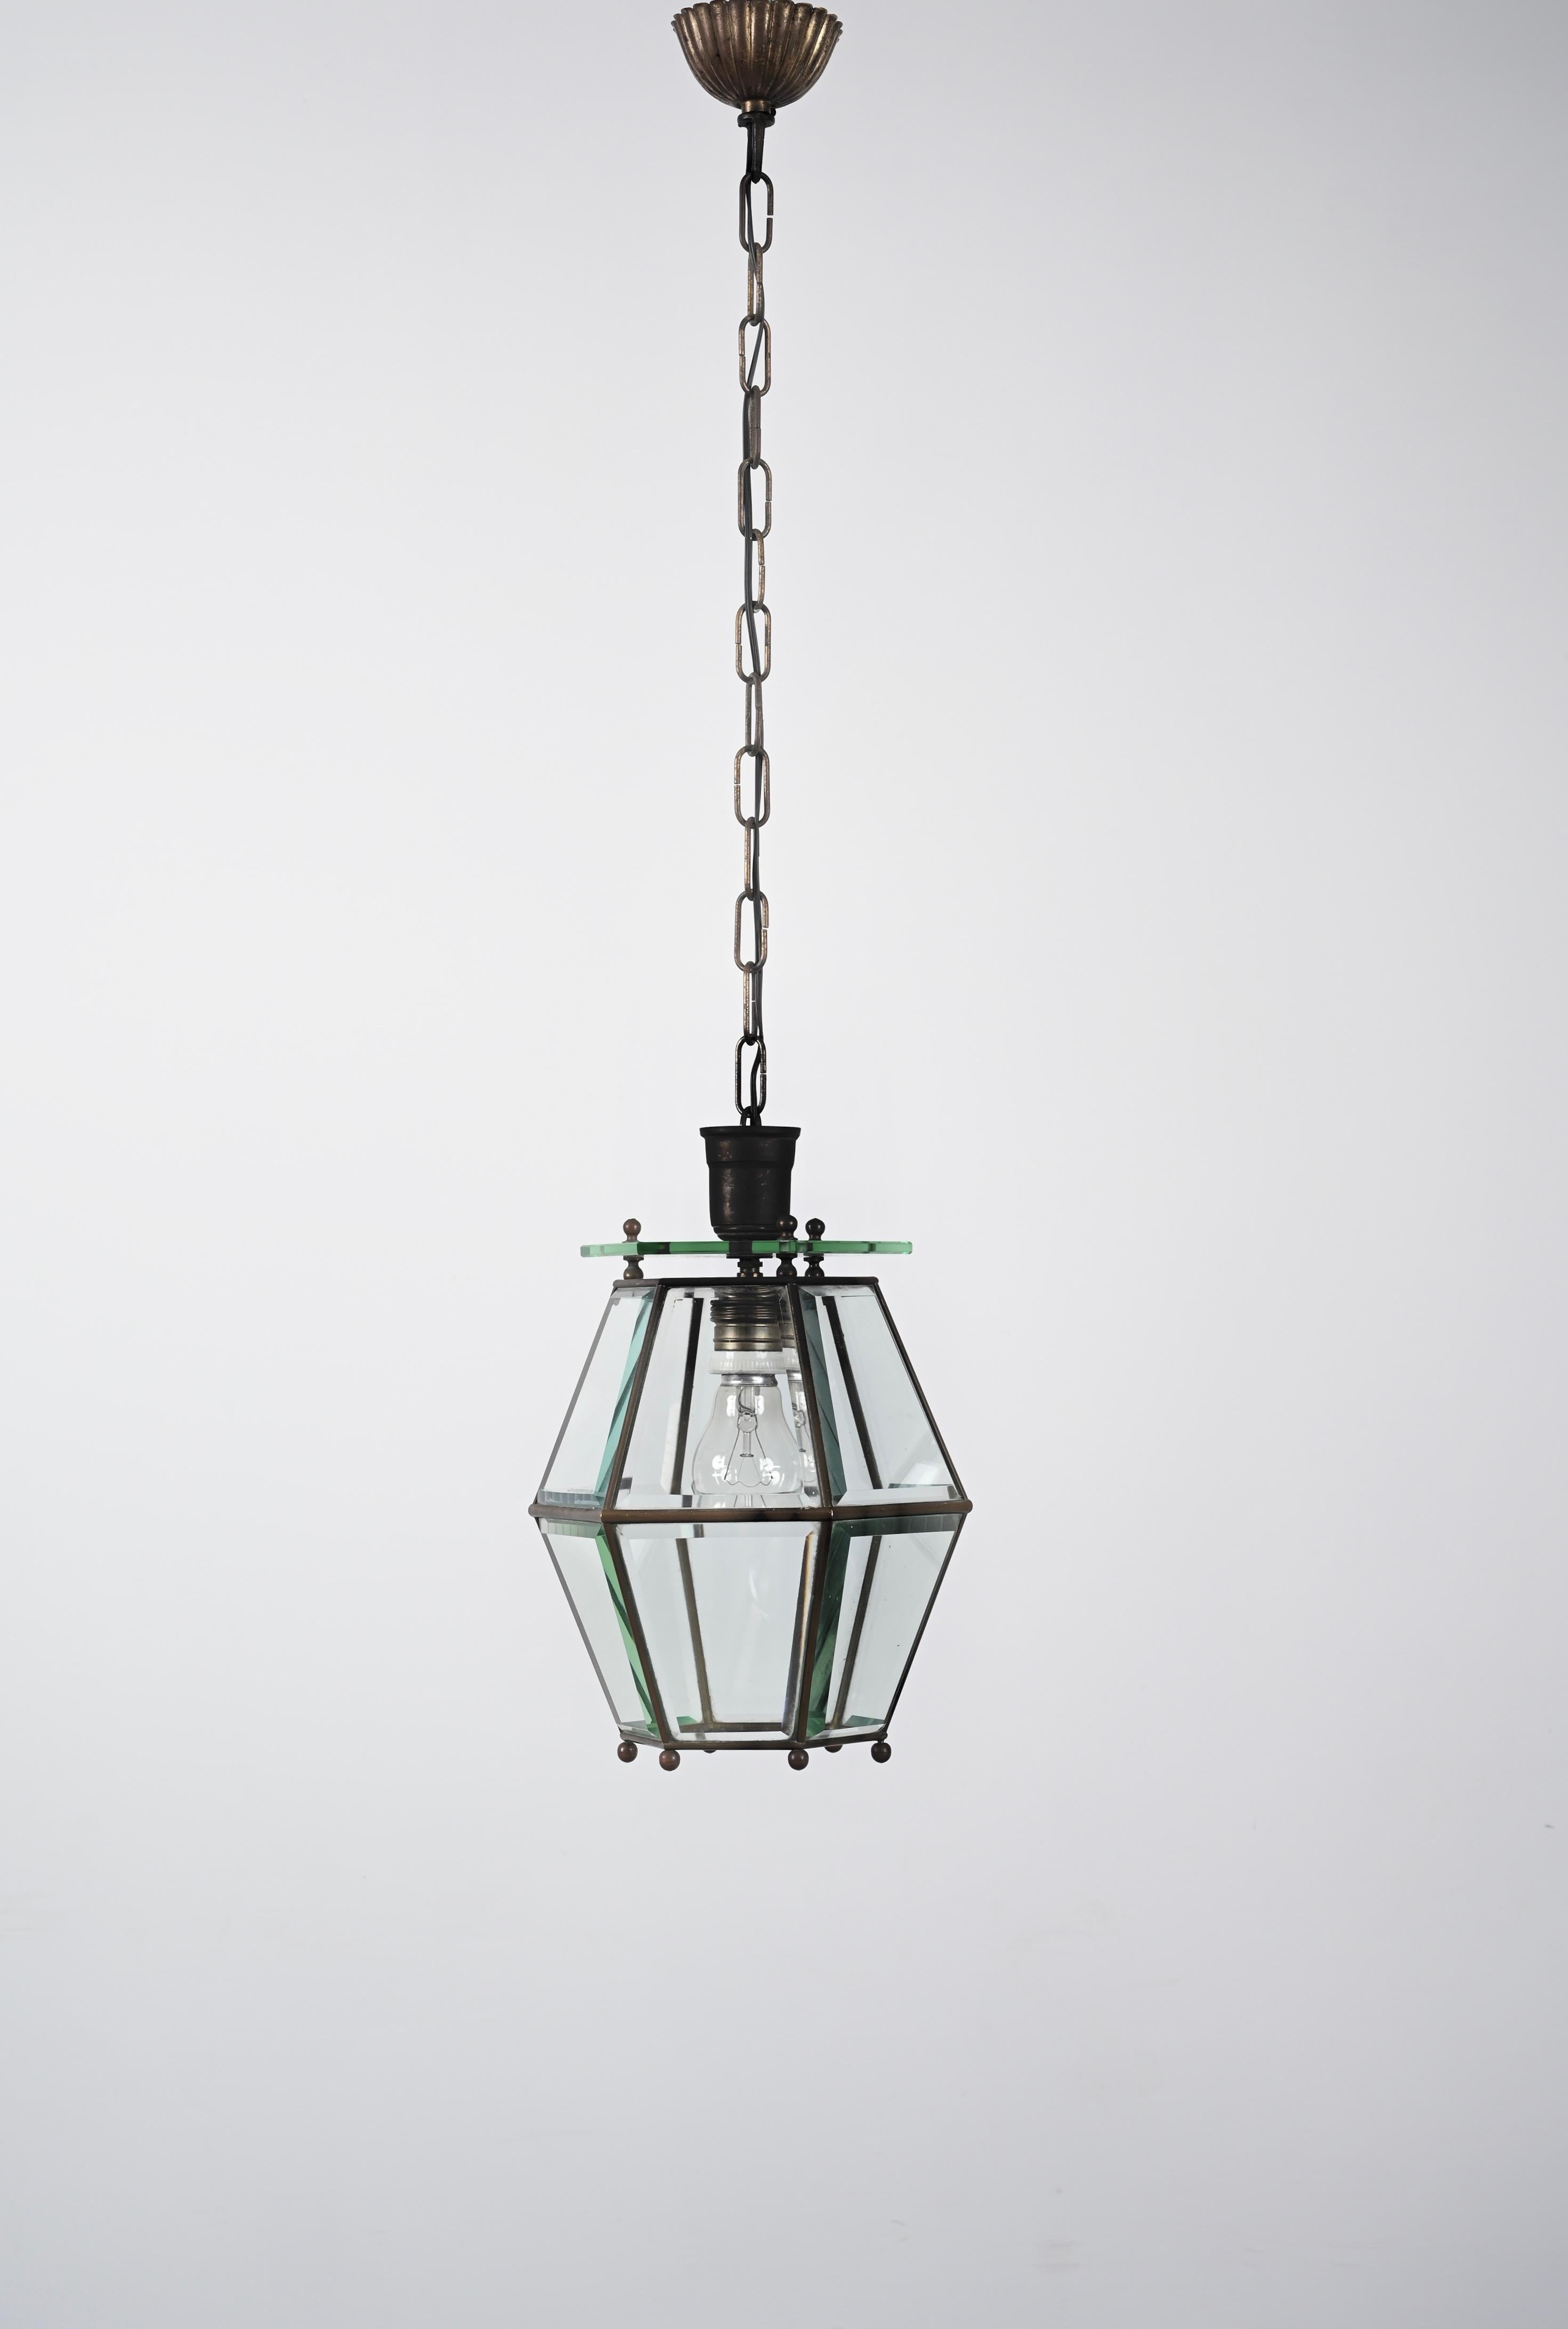 Brass and Beveled Glass Hexagonal Italian Chandelier after Adolf Loos, 1950s For Sale 7